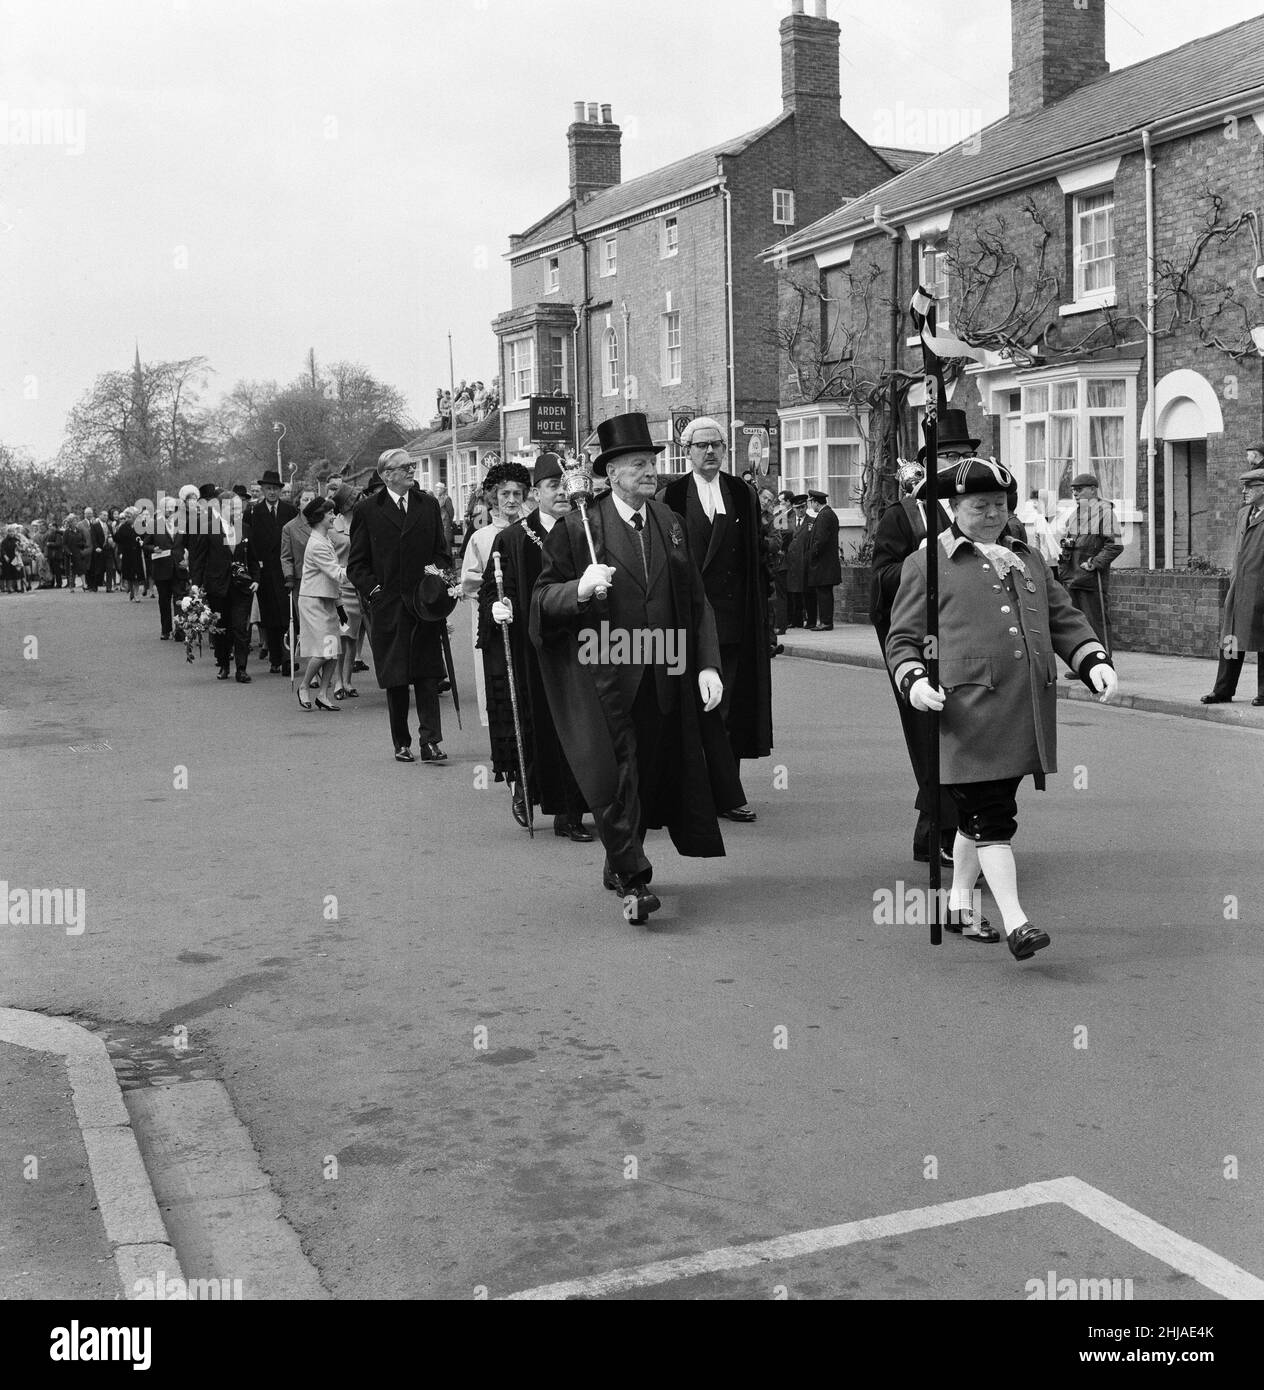 Celebrations for 400 years since the birth of William Shakespeare in Stratford-upon-Avon.  The procession takes place. 23rd April 1964. Stock Photo